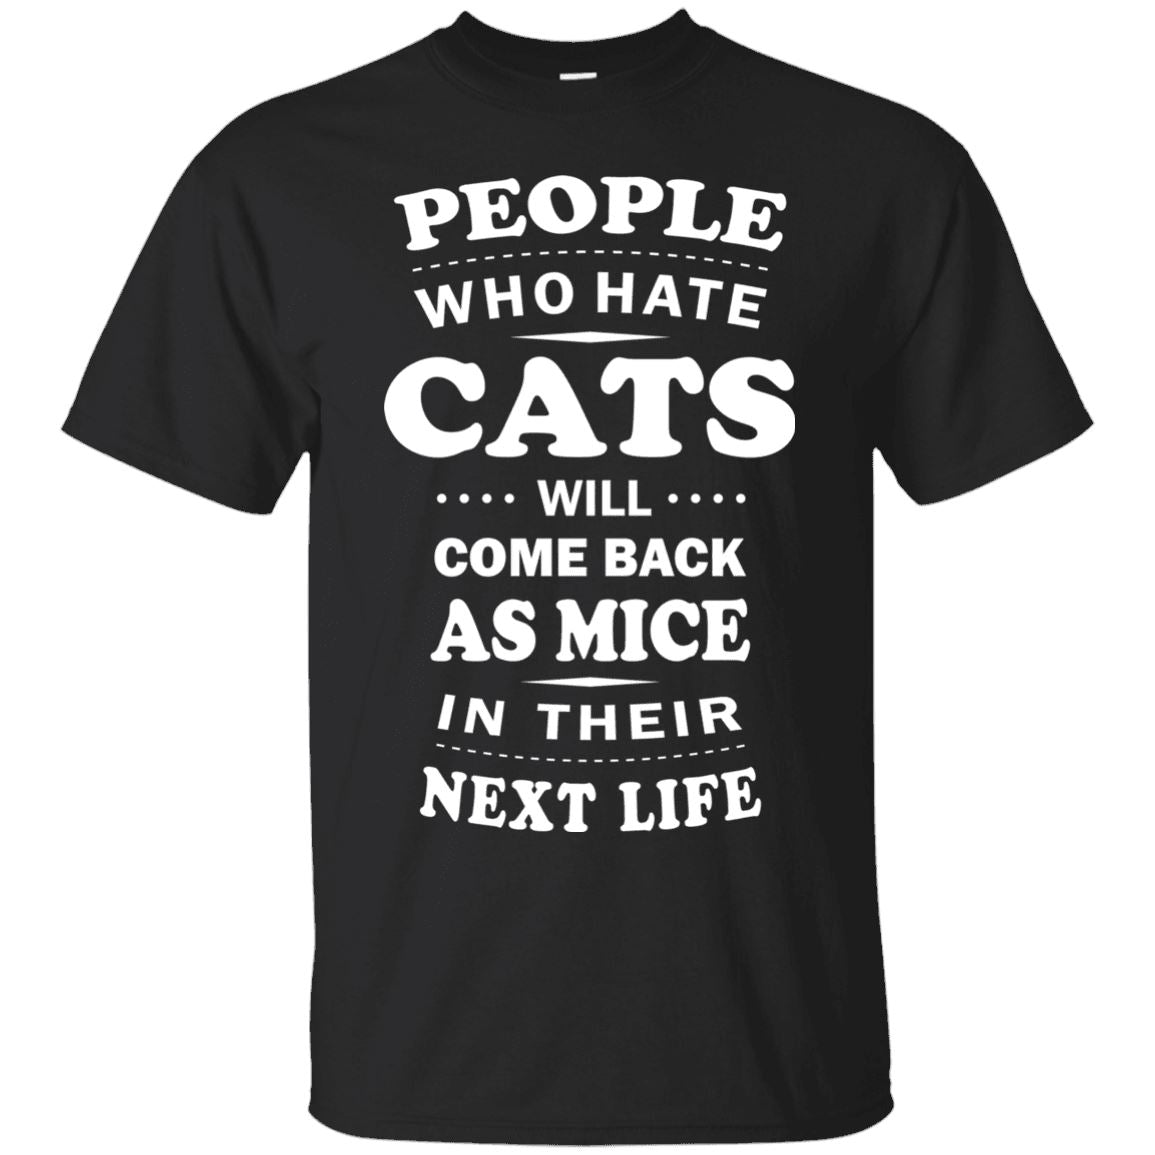 People Who Hate Cats Will Come Back As Mice - Cat Shirt